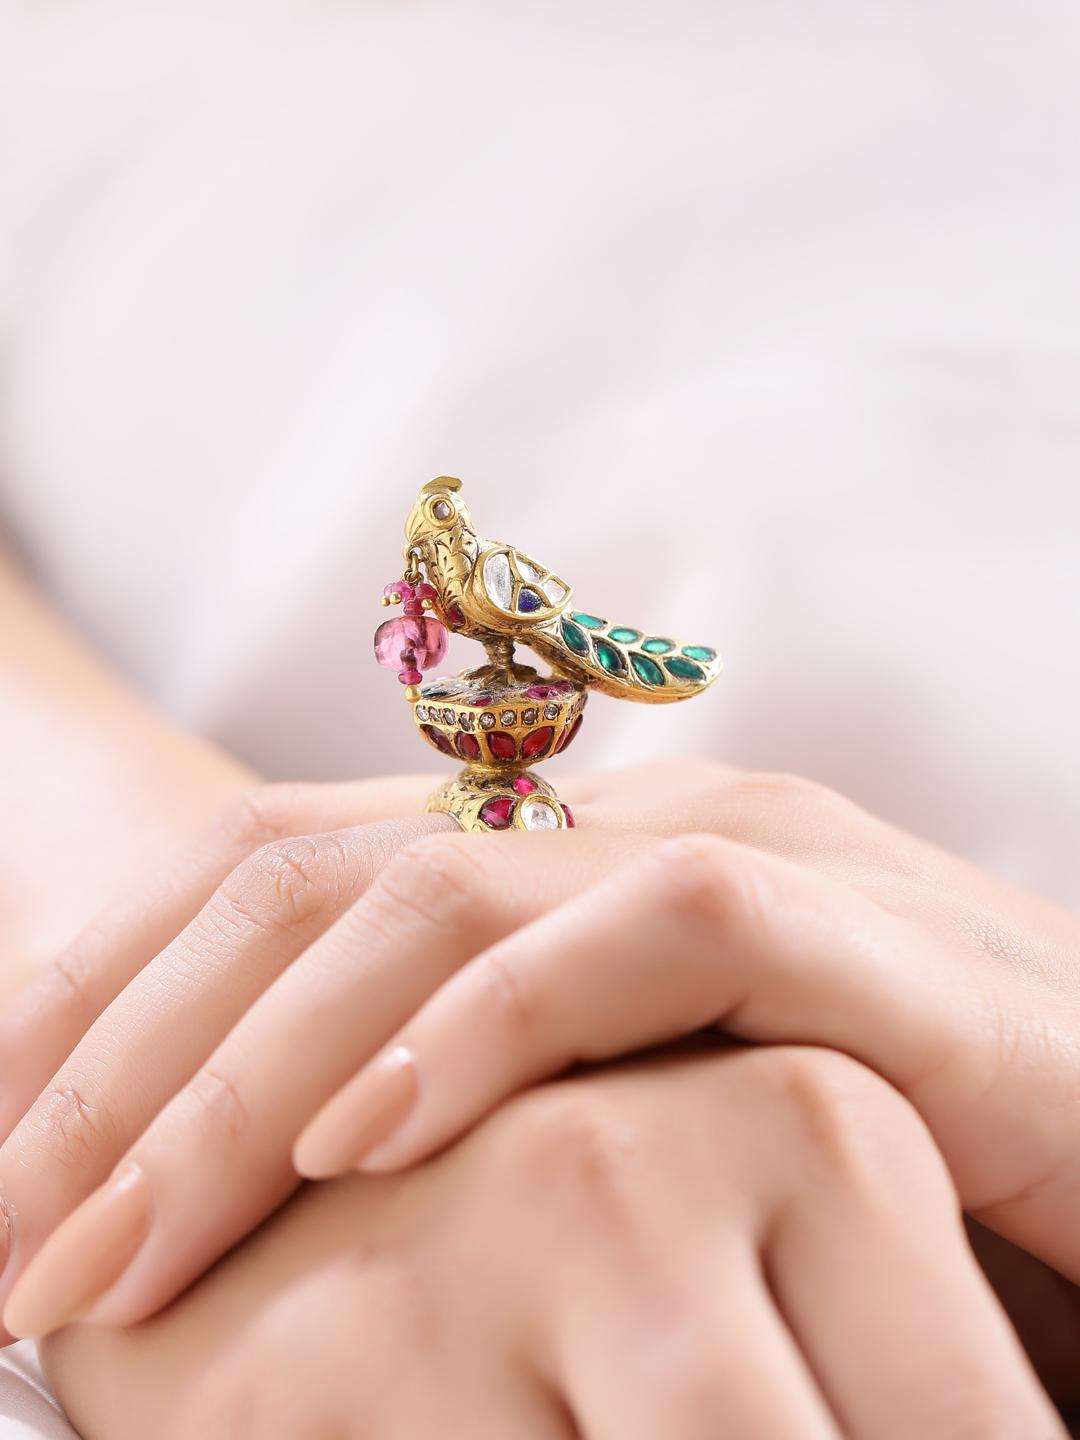 Uncut Bird Statement Ring with Diamonds and Tourmaline Handcrafted in 18 Karat Gold